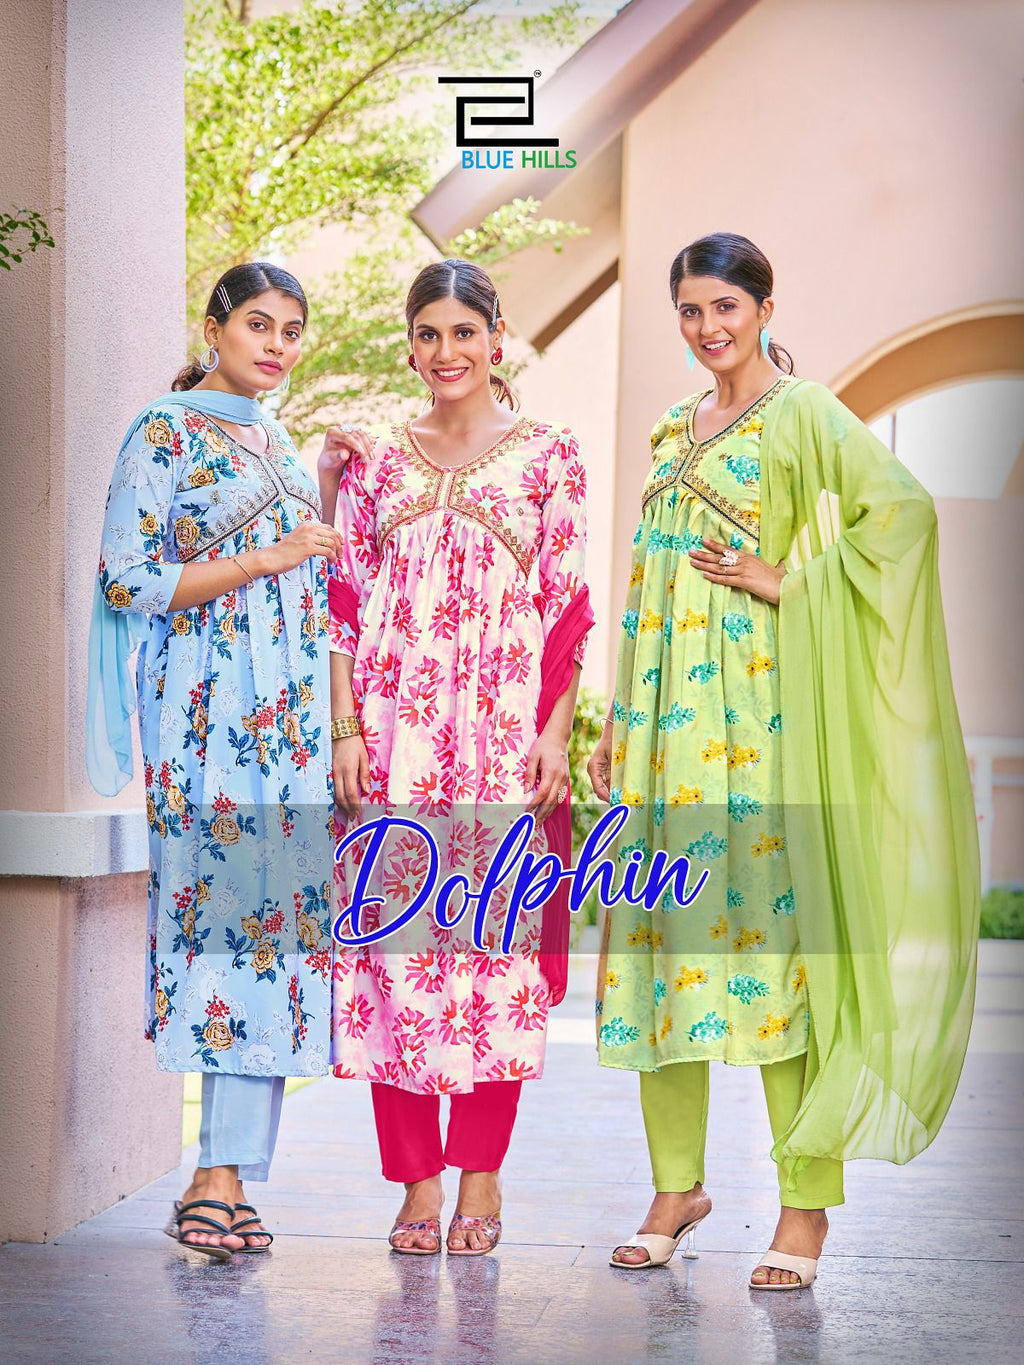 D.Dolphin Present New Western Dress Colours Combination #Beautiful Dress -  YouTube